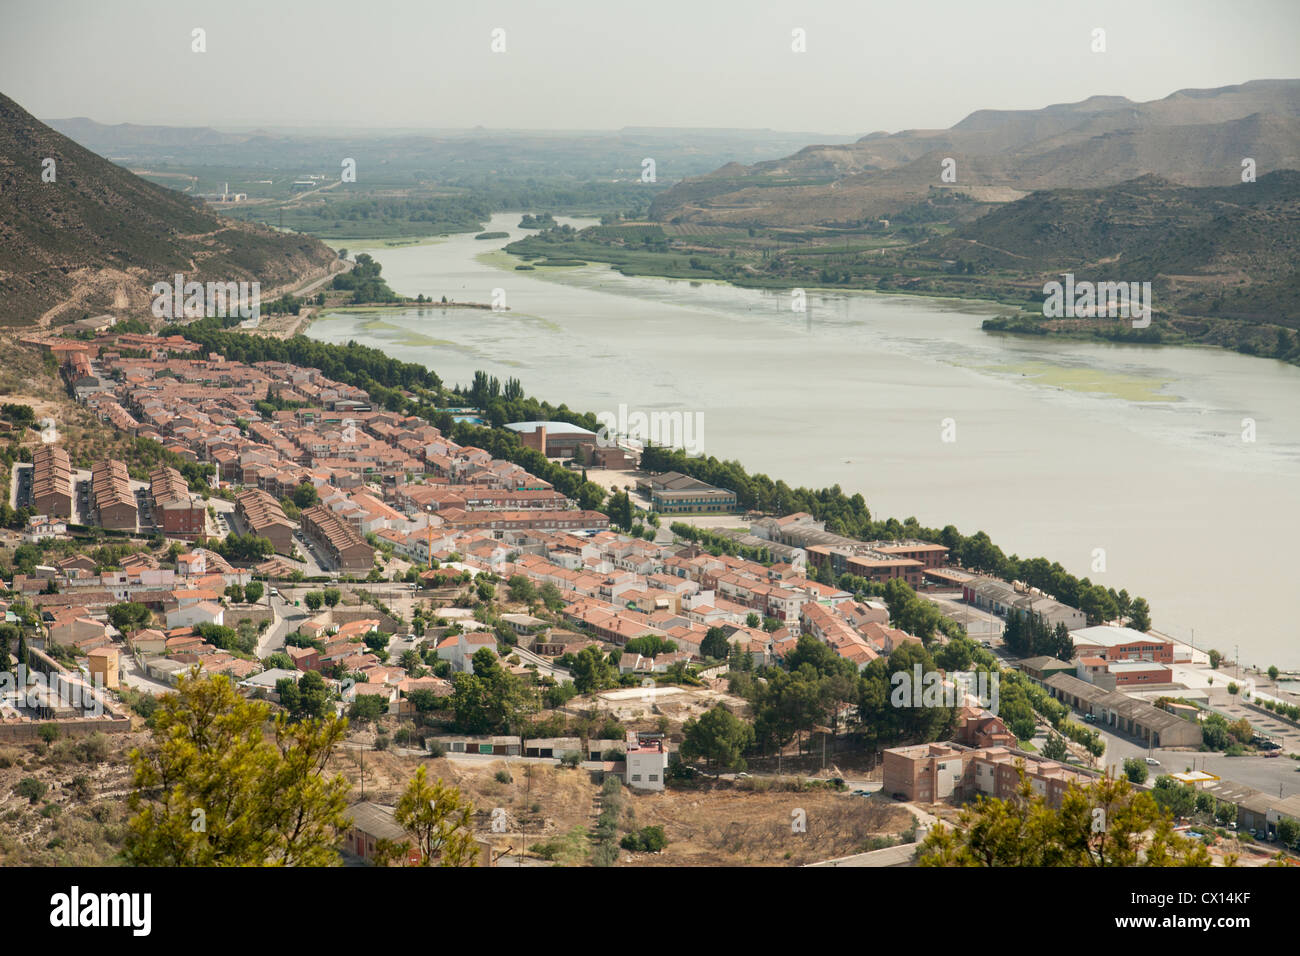 Overview of Mequinenza, the new town and the Ebro river from the castle. Zaragoza, Aragon, Spain Stock Photo